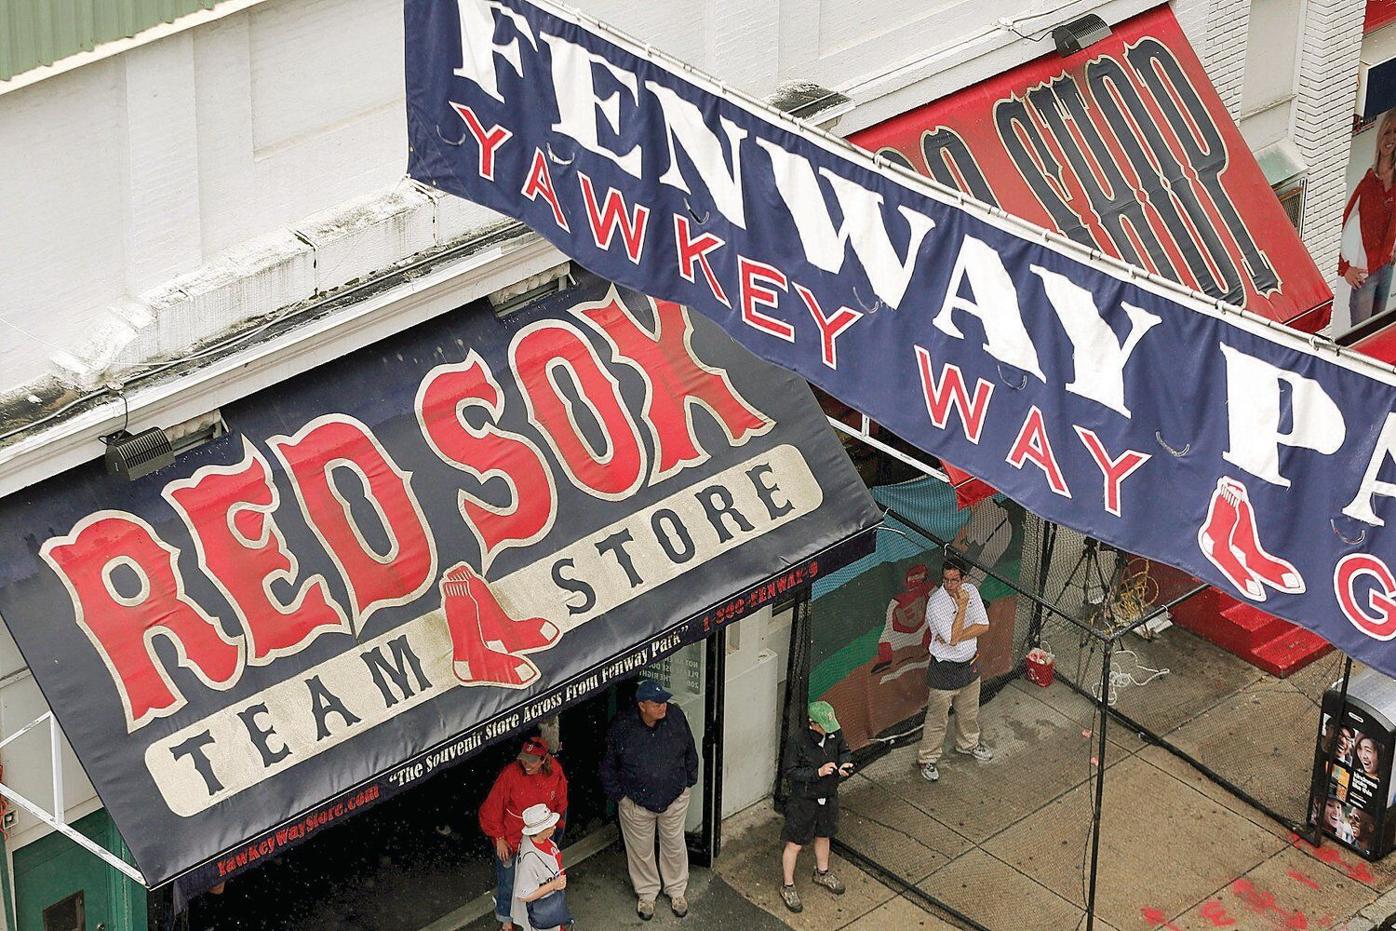 Jake Mendel, On Track: Recalling a not-so-great first trip to Fenway Park, Archives